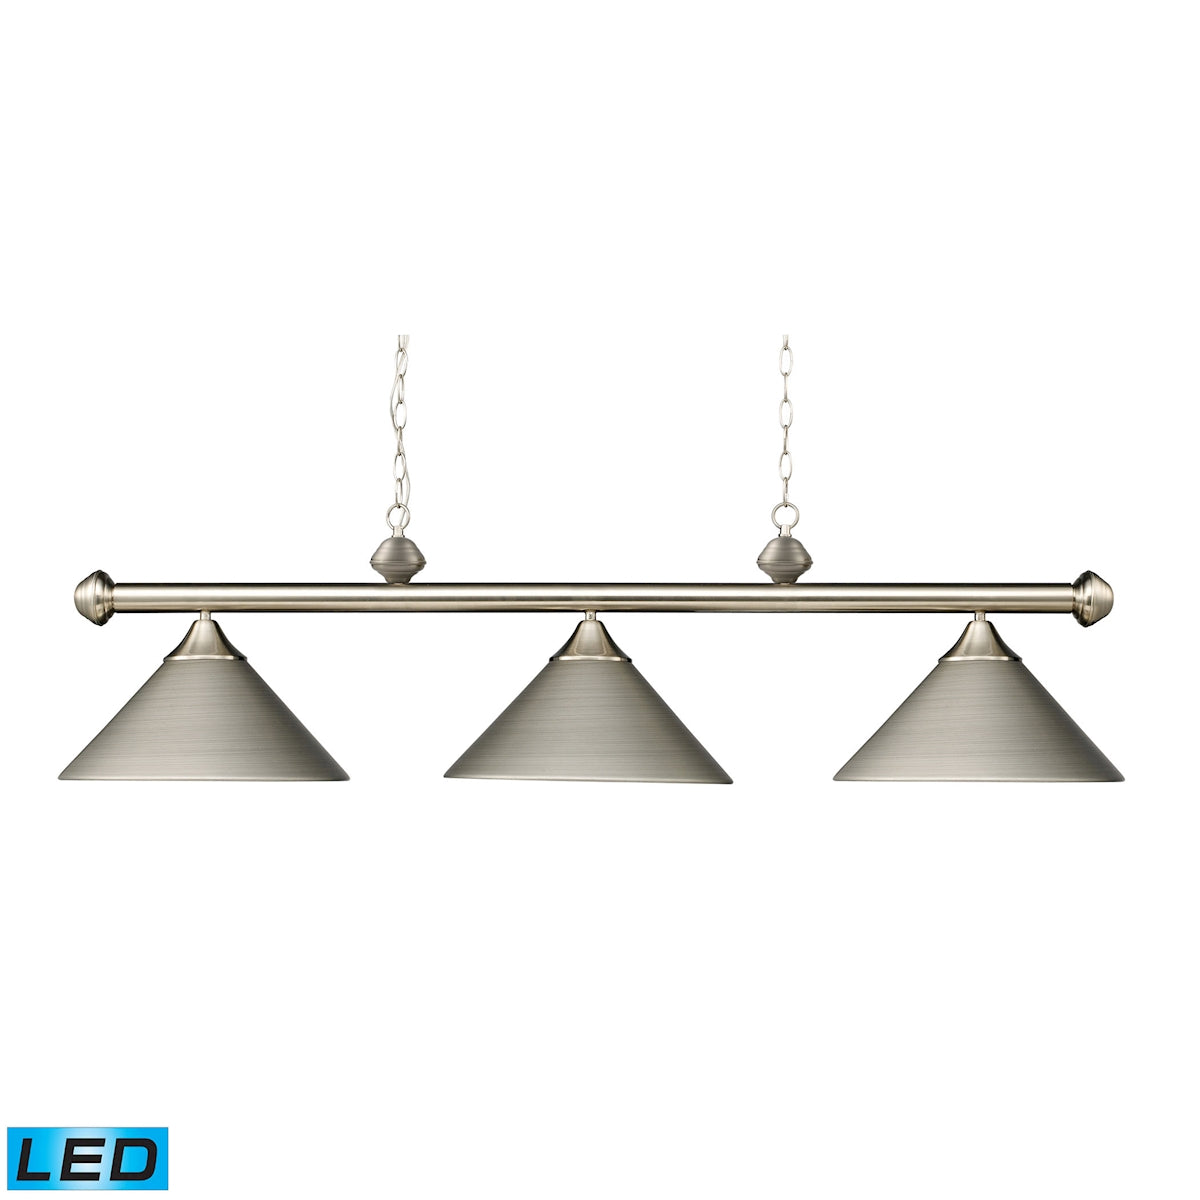 ELK Lighting 168-SN-LED Casual Traditions 3-Light Island Light in Satin Nickel with Metal Shades - Includes LED Bulbs